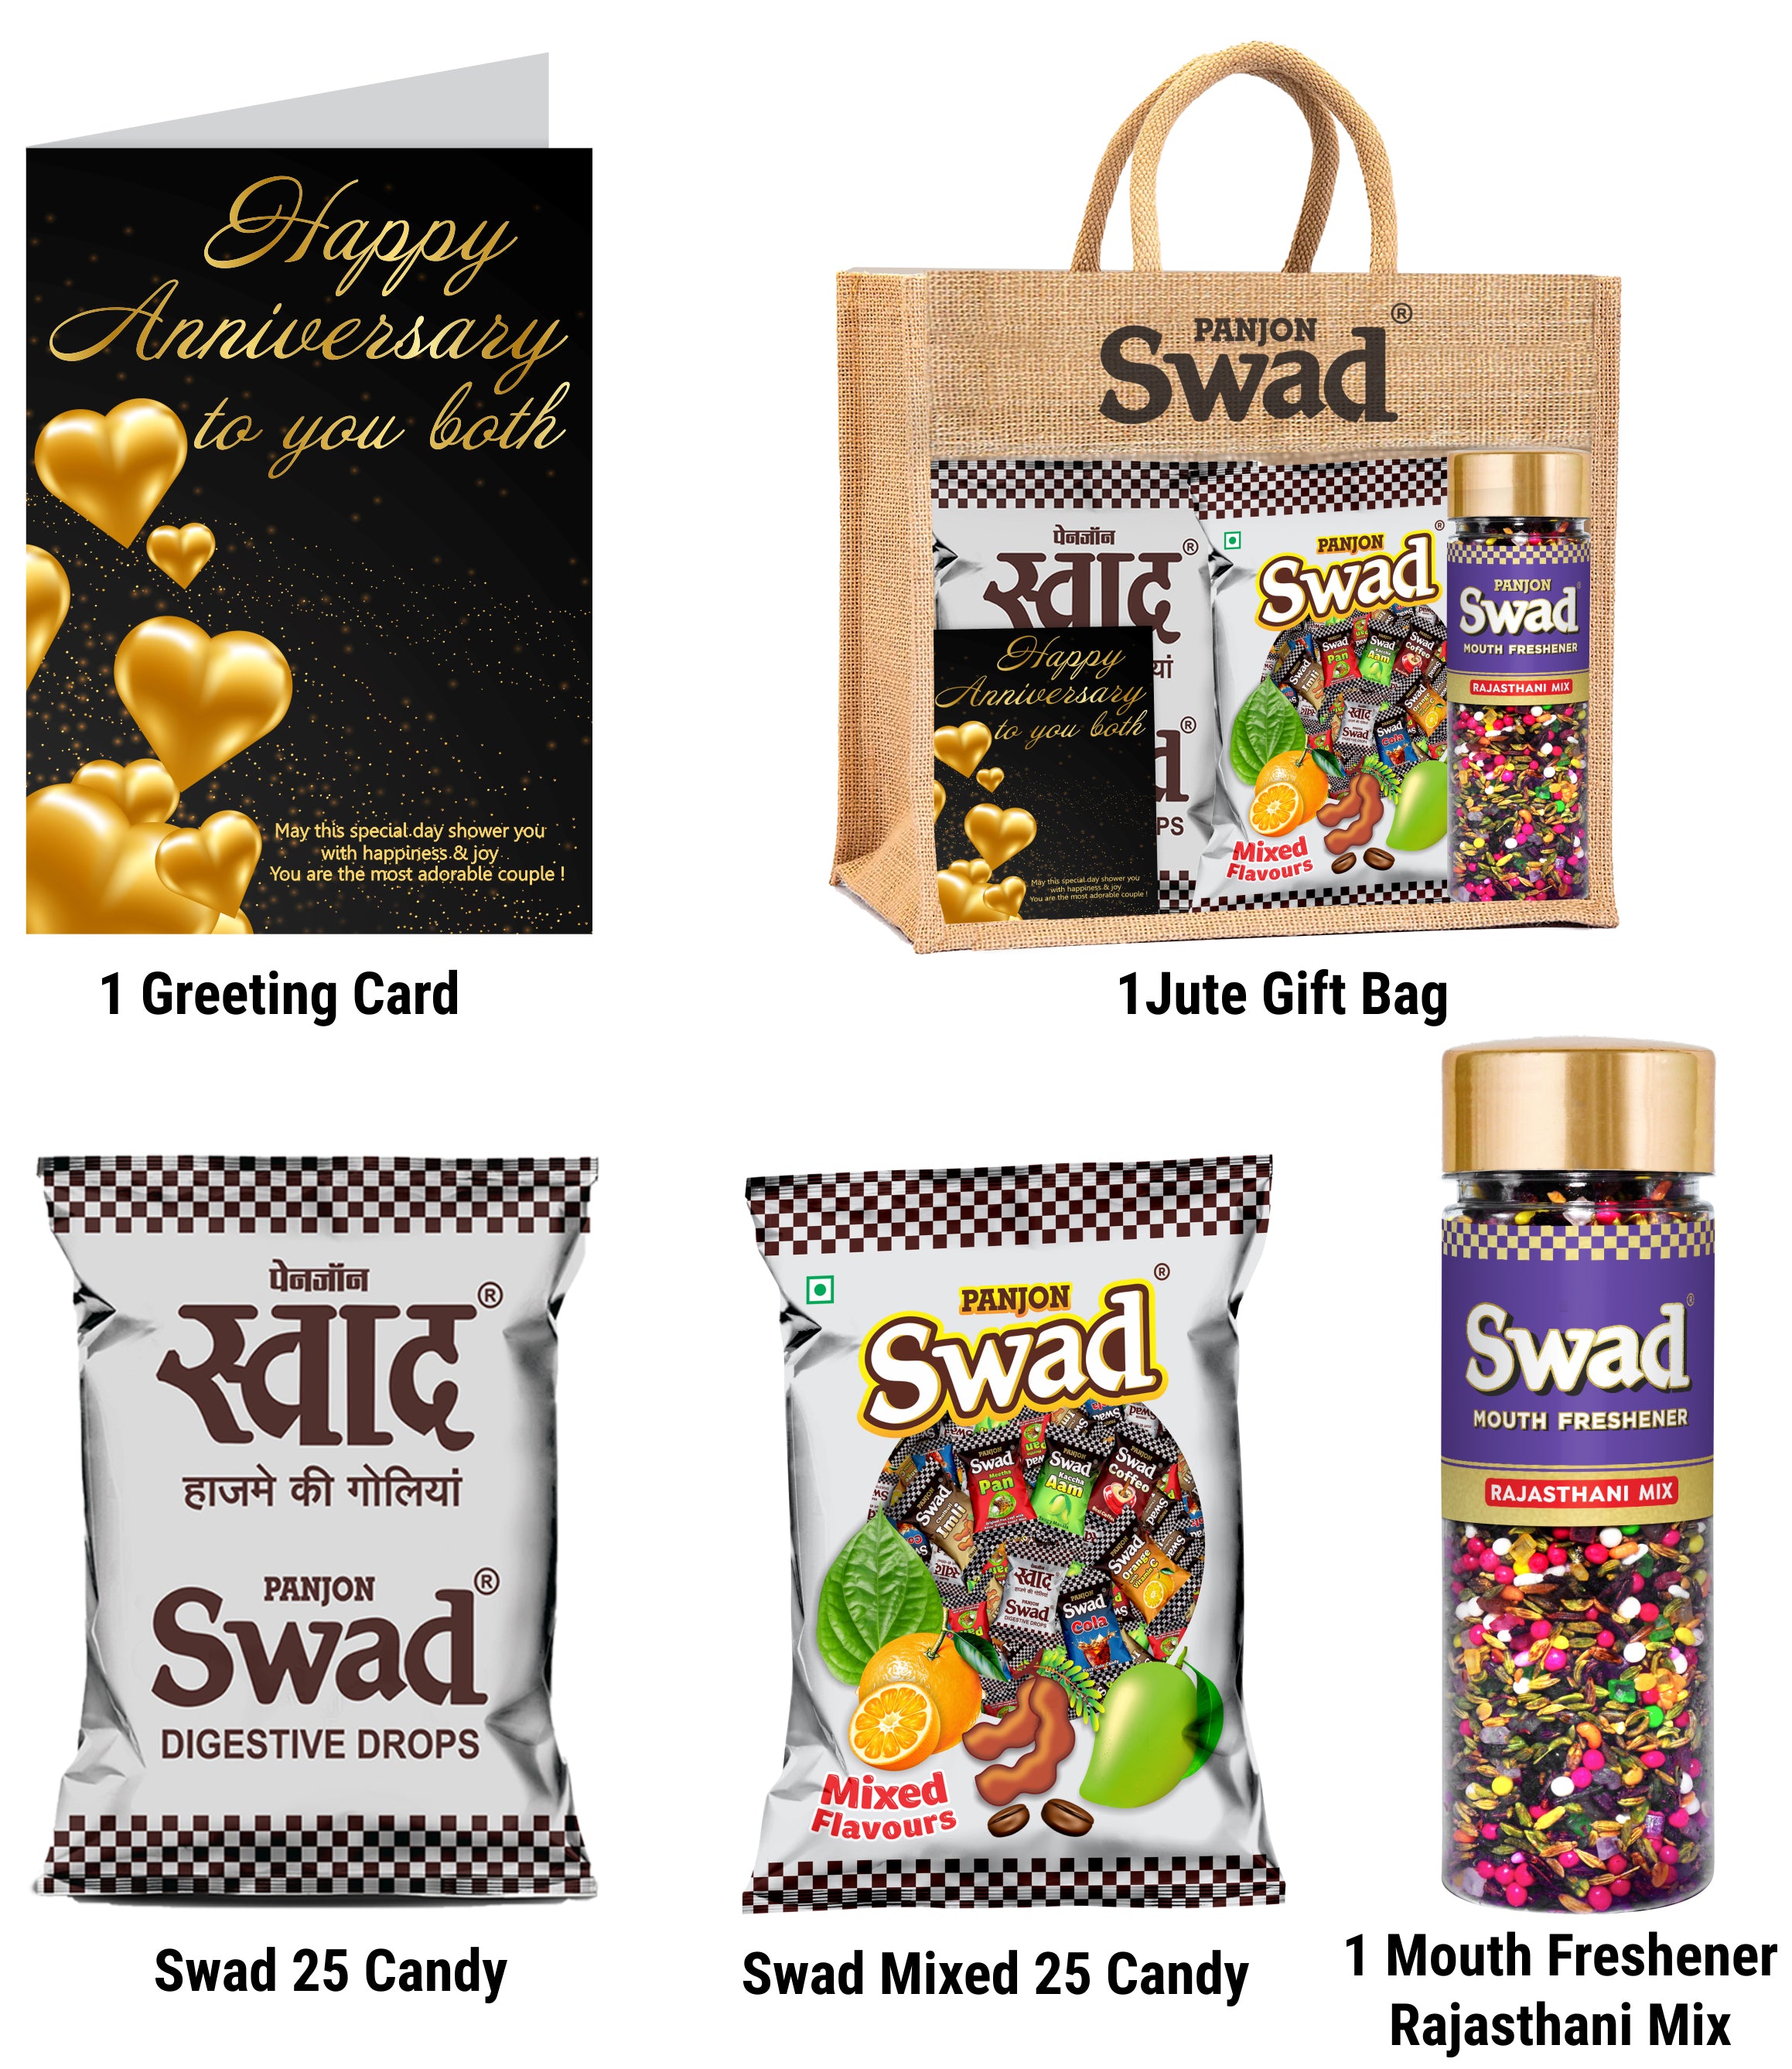 Swad Happy Anniversary Friends Gift with Card (25 Swad Candy, 25 Mixed Toffee, Rajasthani Mix Mukhwas) in Jute Bag